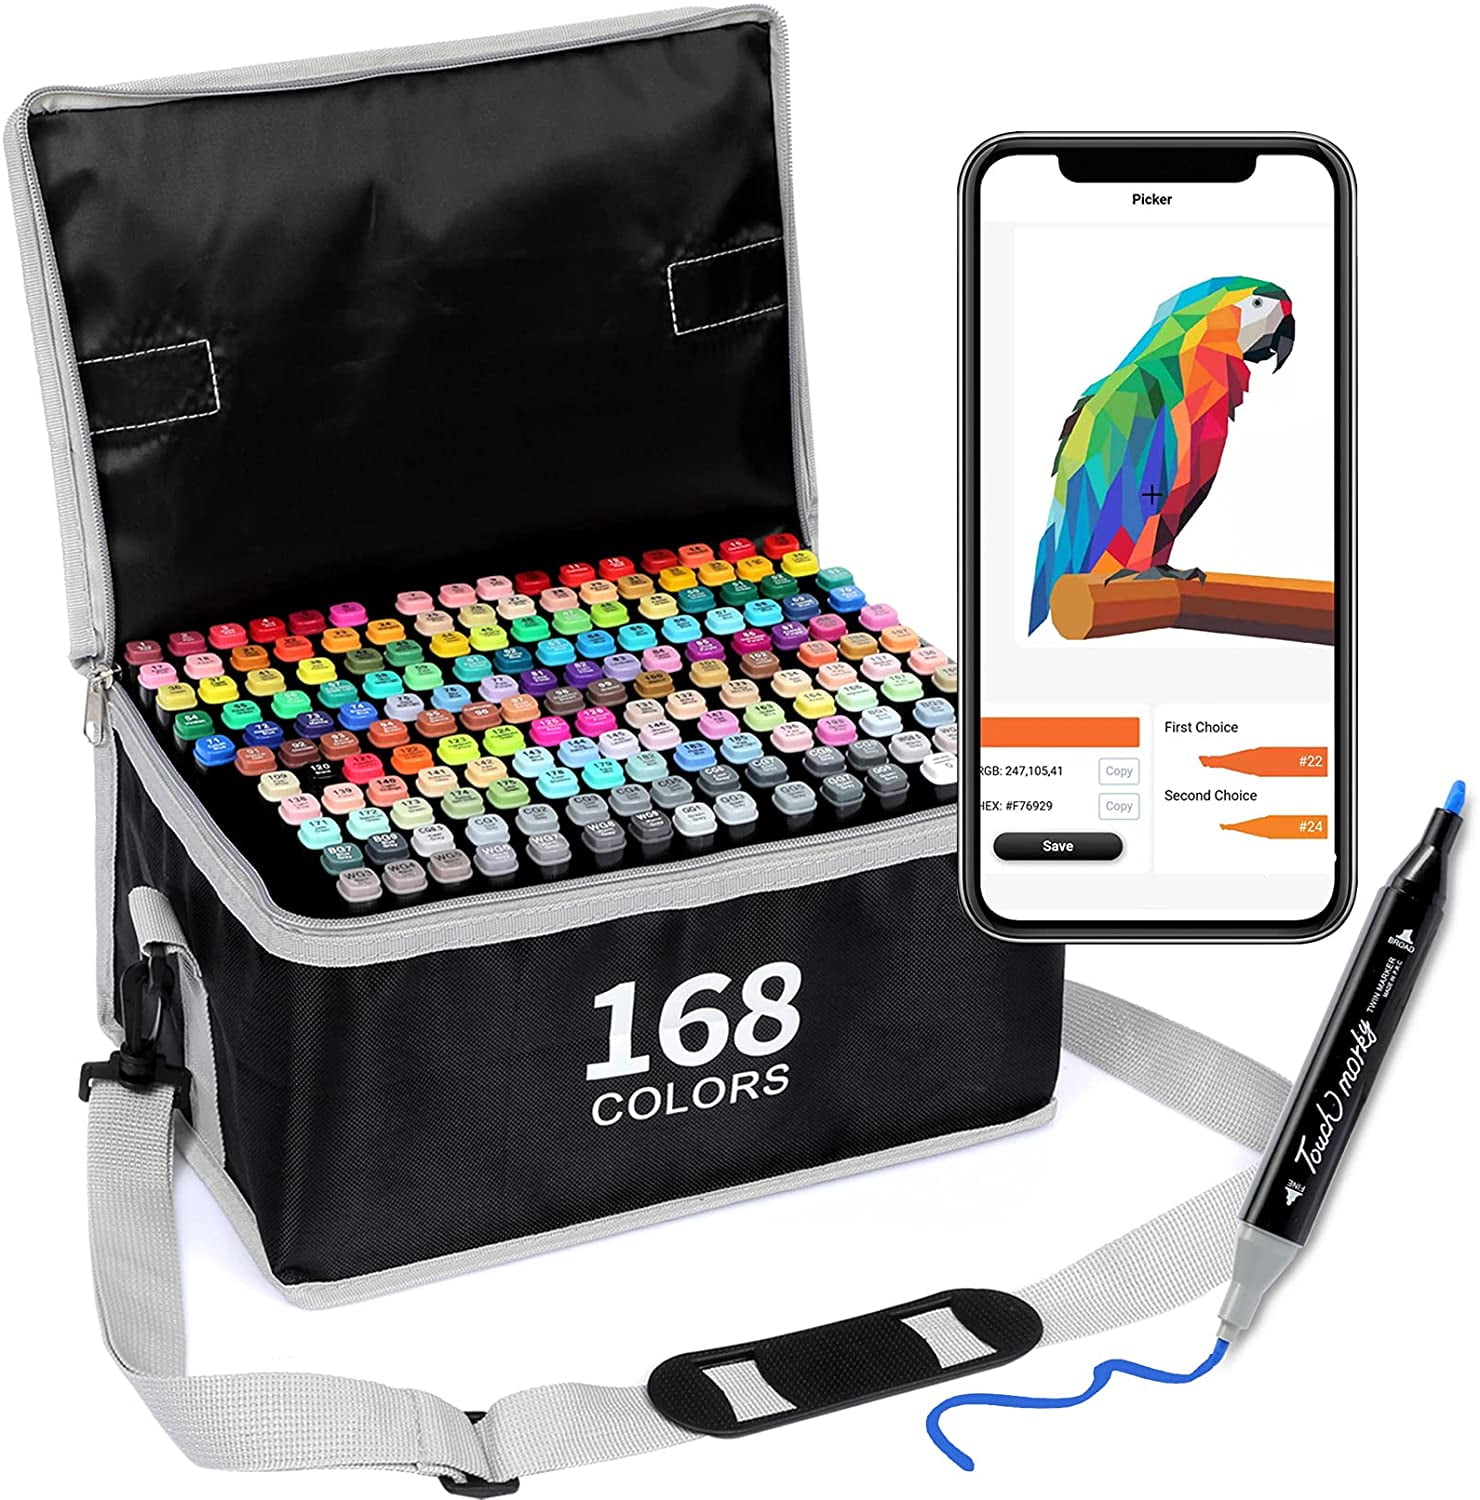 AEDAGA 80 Colors Alcohol Markers with Free App, Dual Tip Art Markers with  Kickstand Case for Artists Adults and Kids. Alcohol Based Markers for